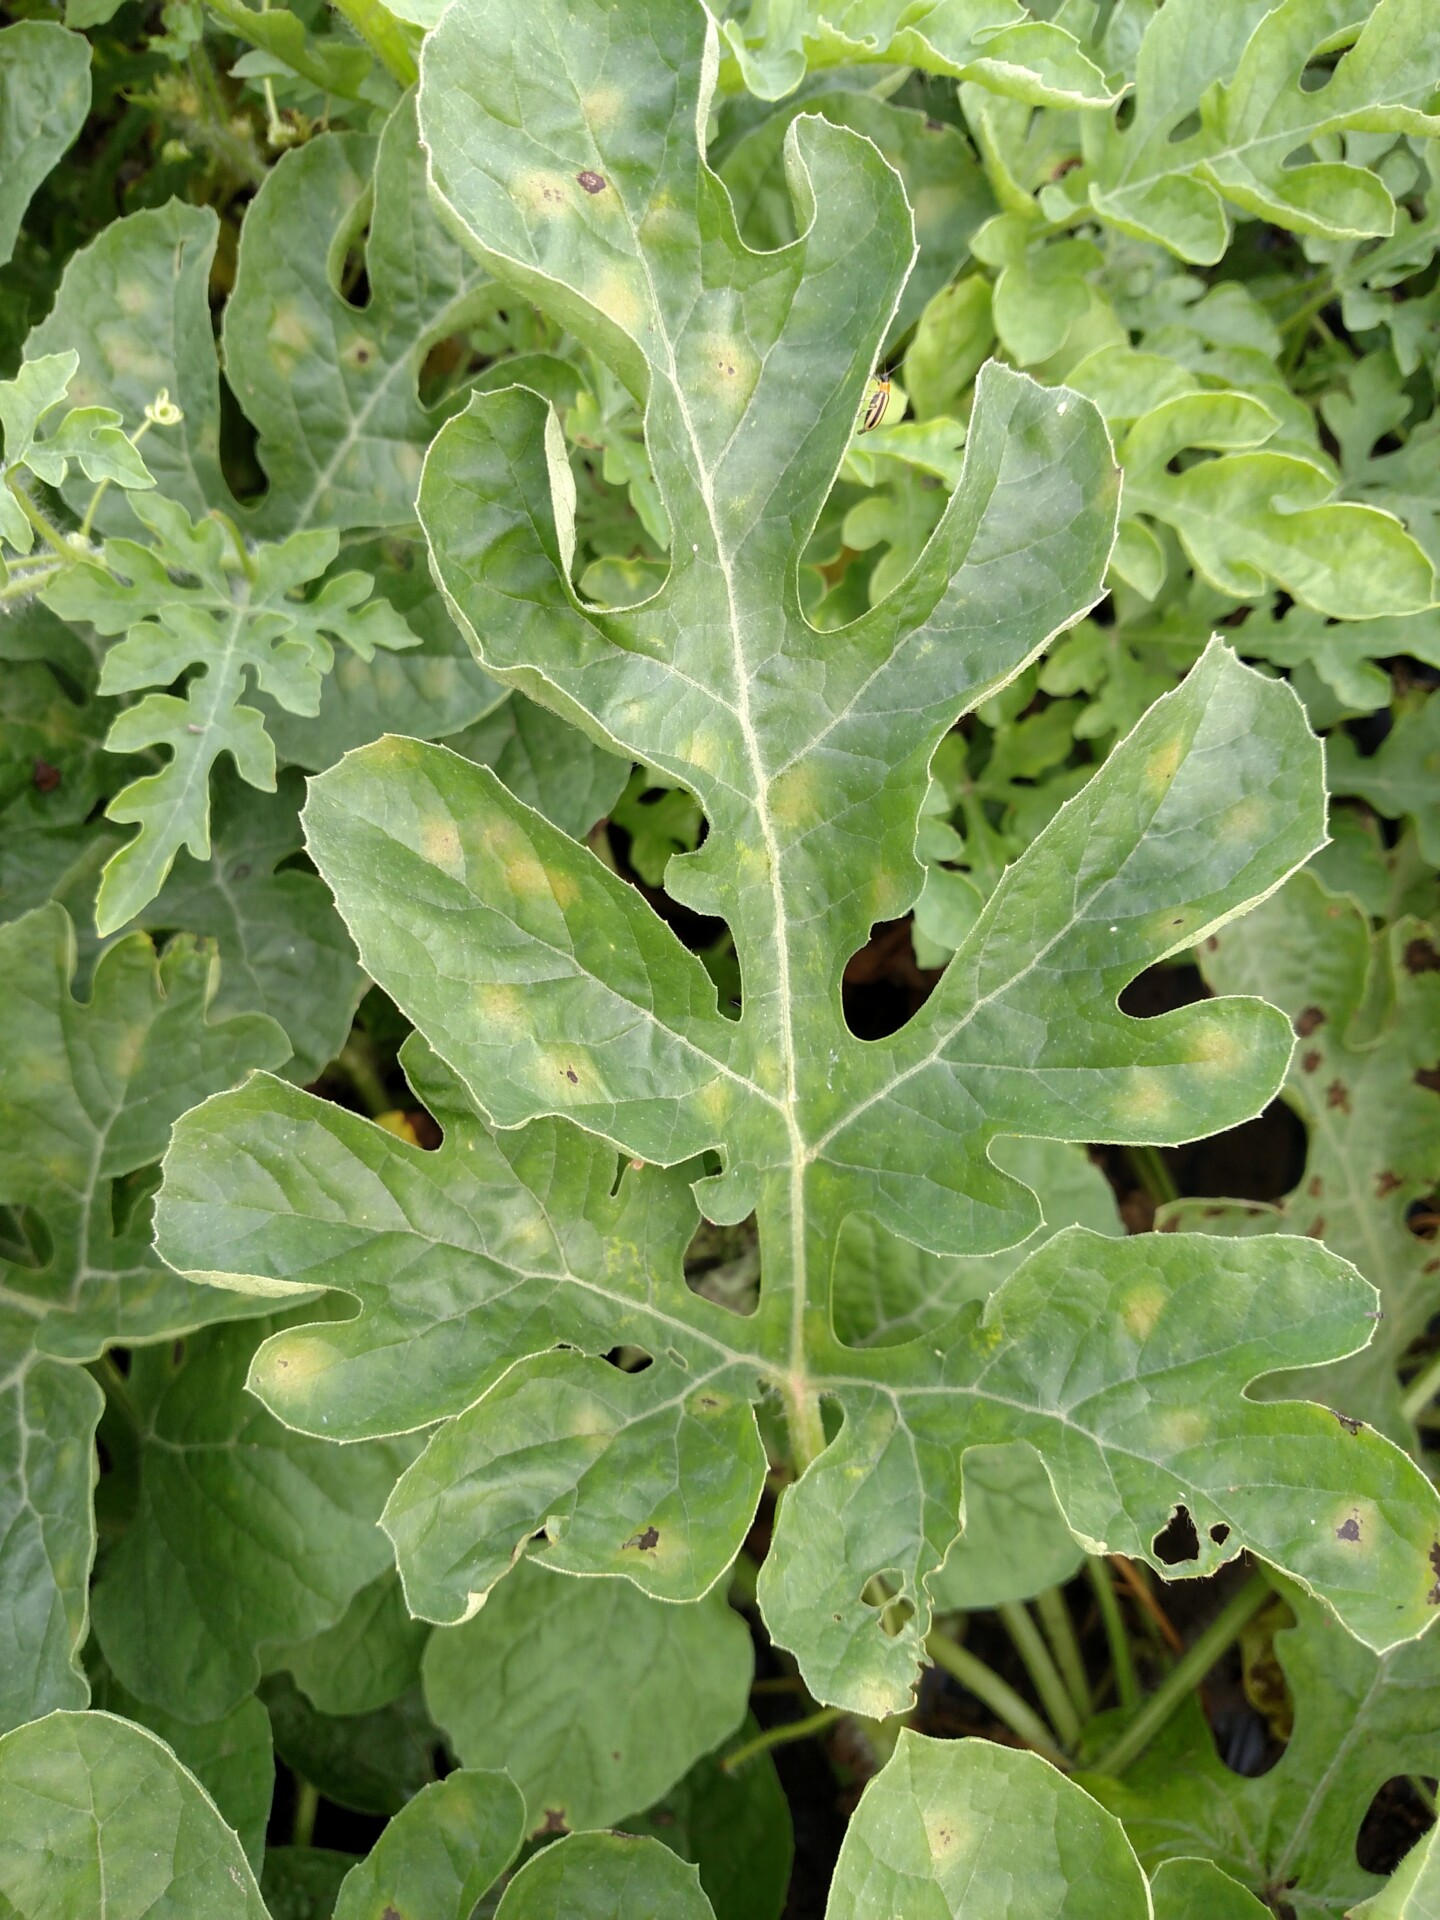 Figure 1. Chlorotic lesions of downy mildew on a watermelon leaf. Note that a few of the lesions are starting to become necrotic.